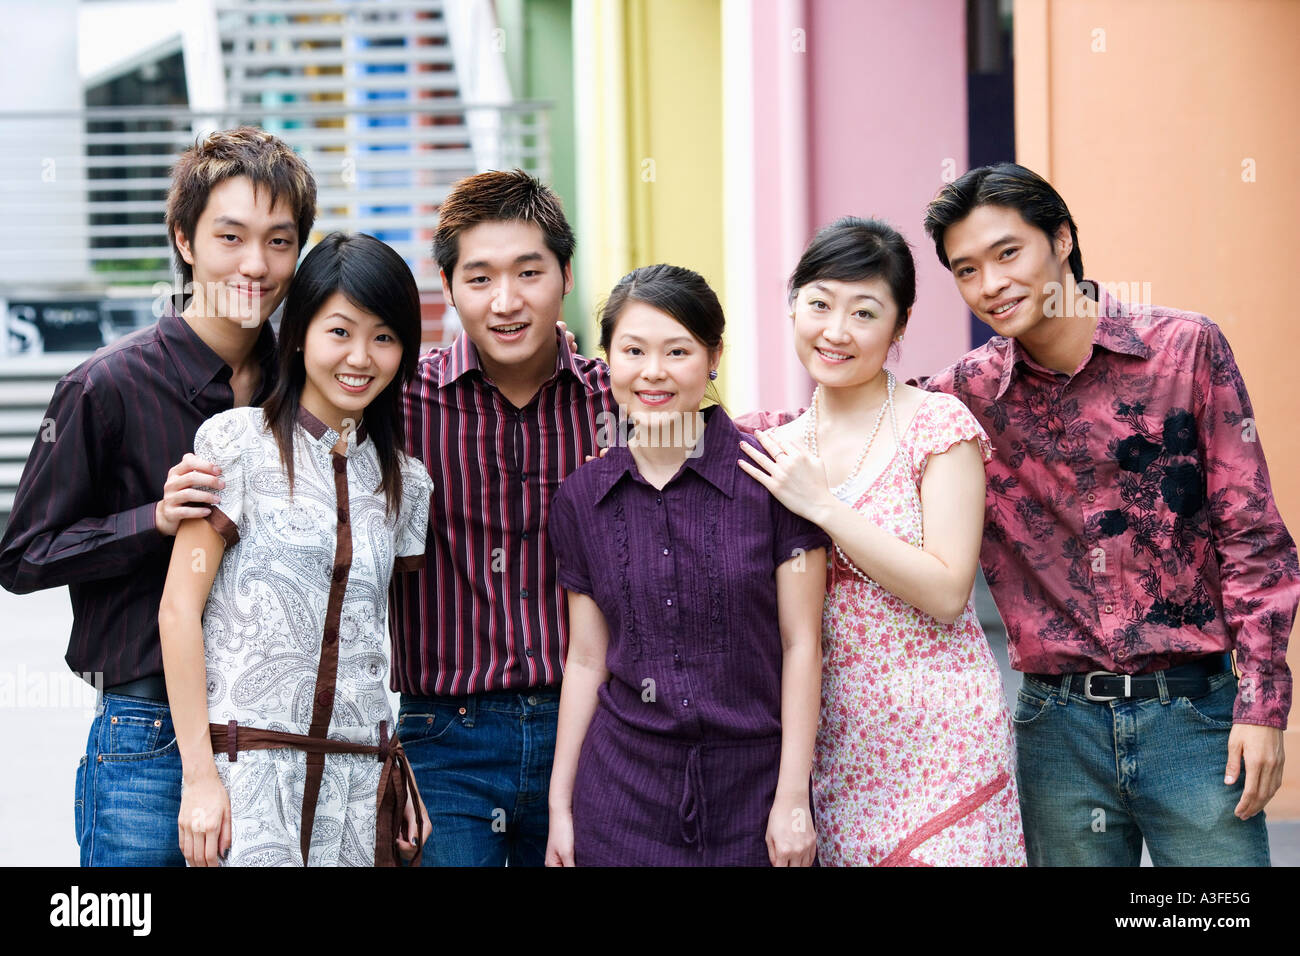 Portrait of a group of people standing together and smiling Stock Photo